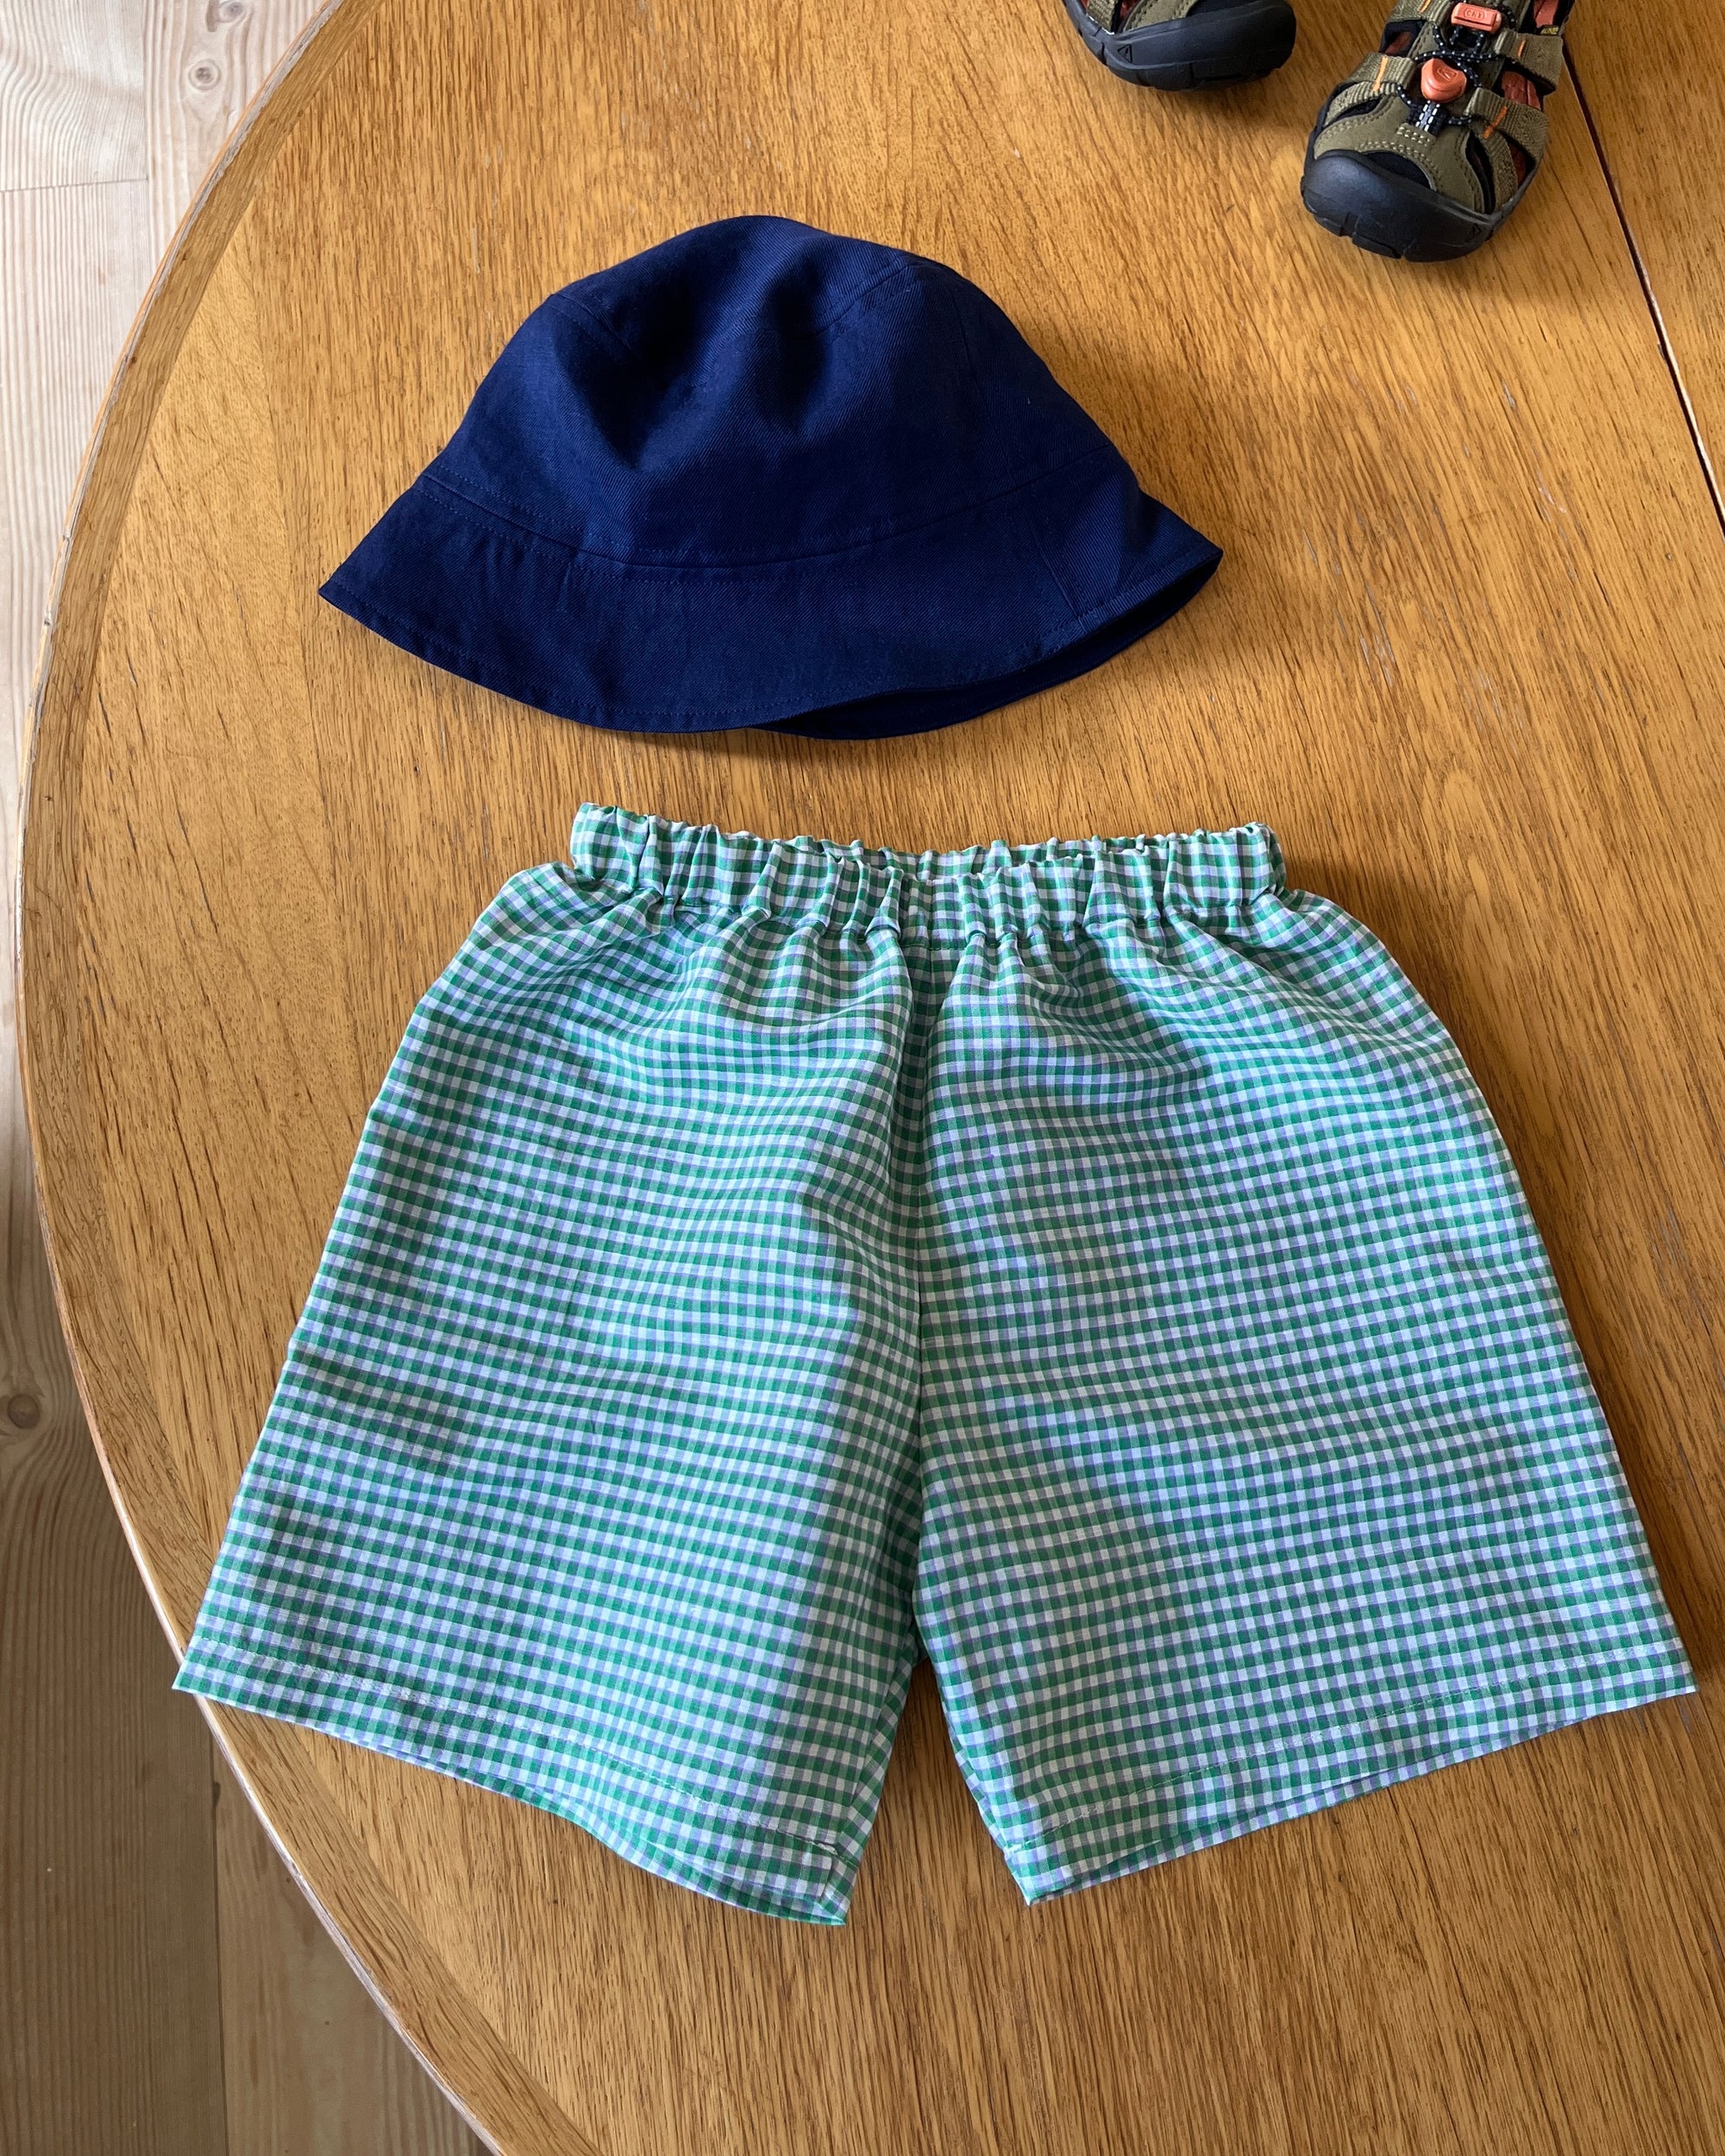 Sewing Project No. 04: Favorite Shorts Mini + Bucket Hat